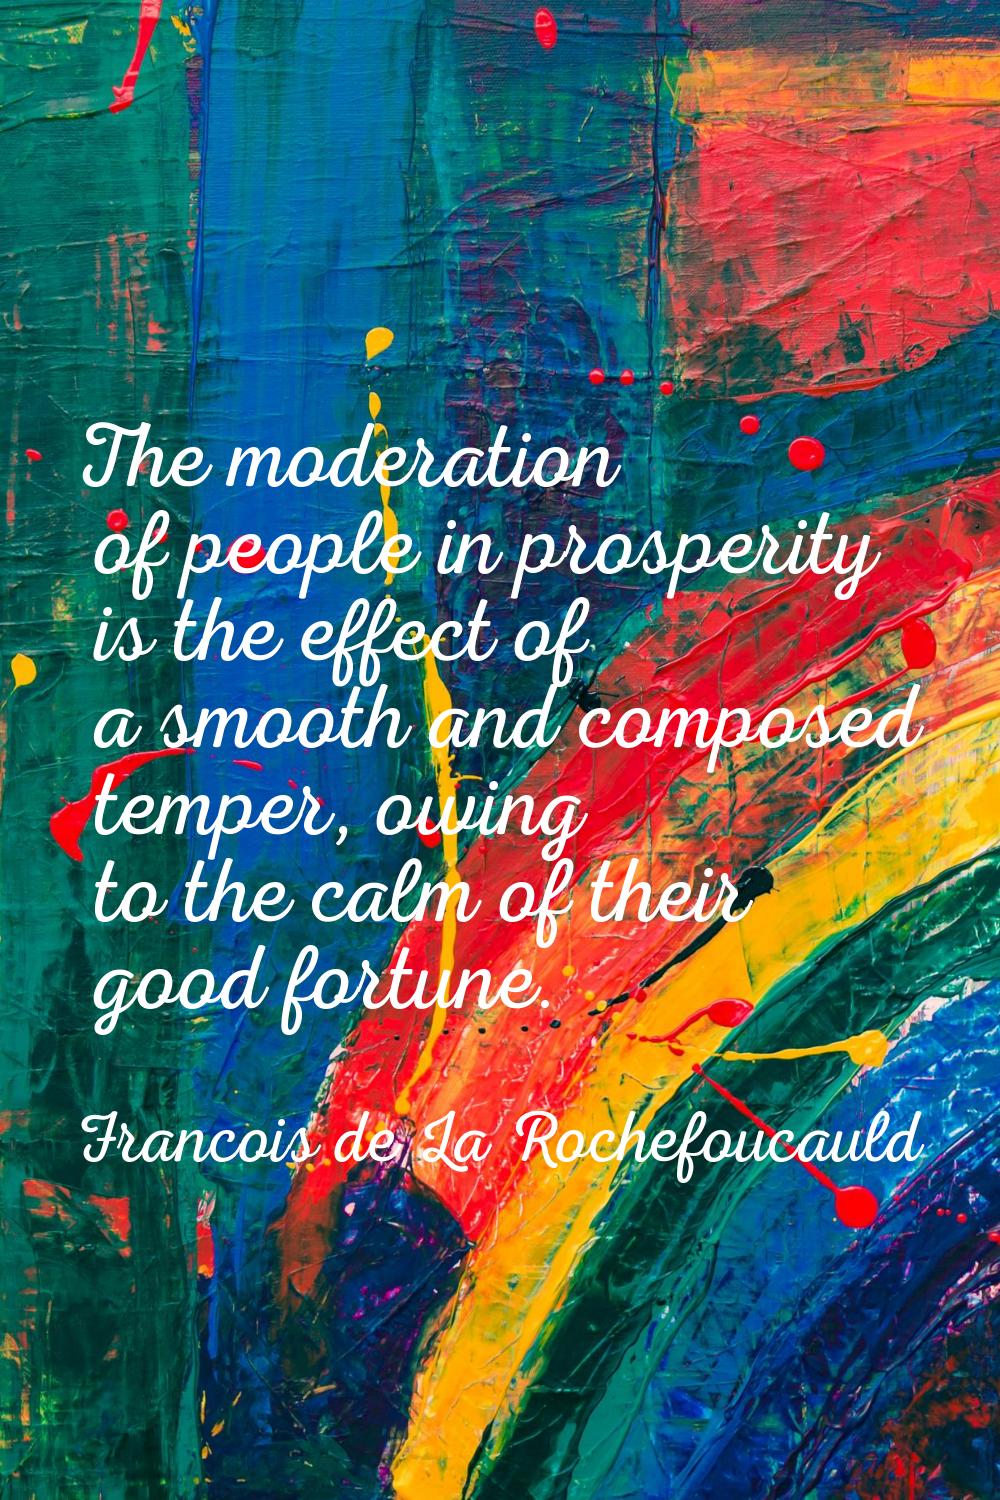 The moderation of people in prosperity is the effect of a smooth and composed temper, owing to the 